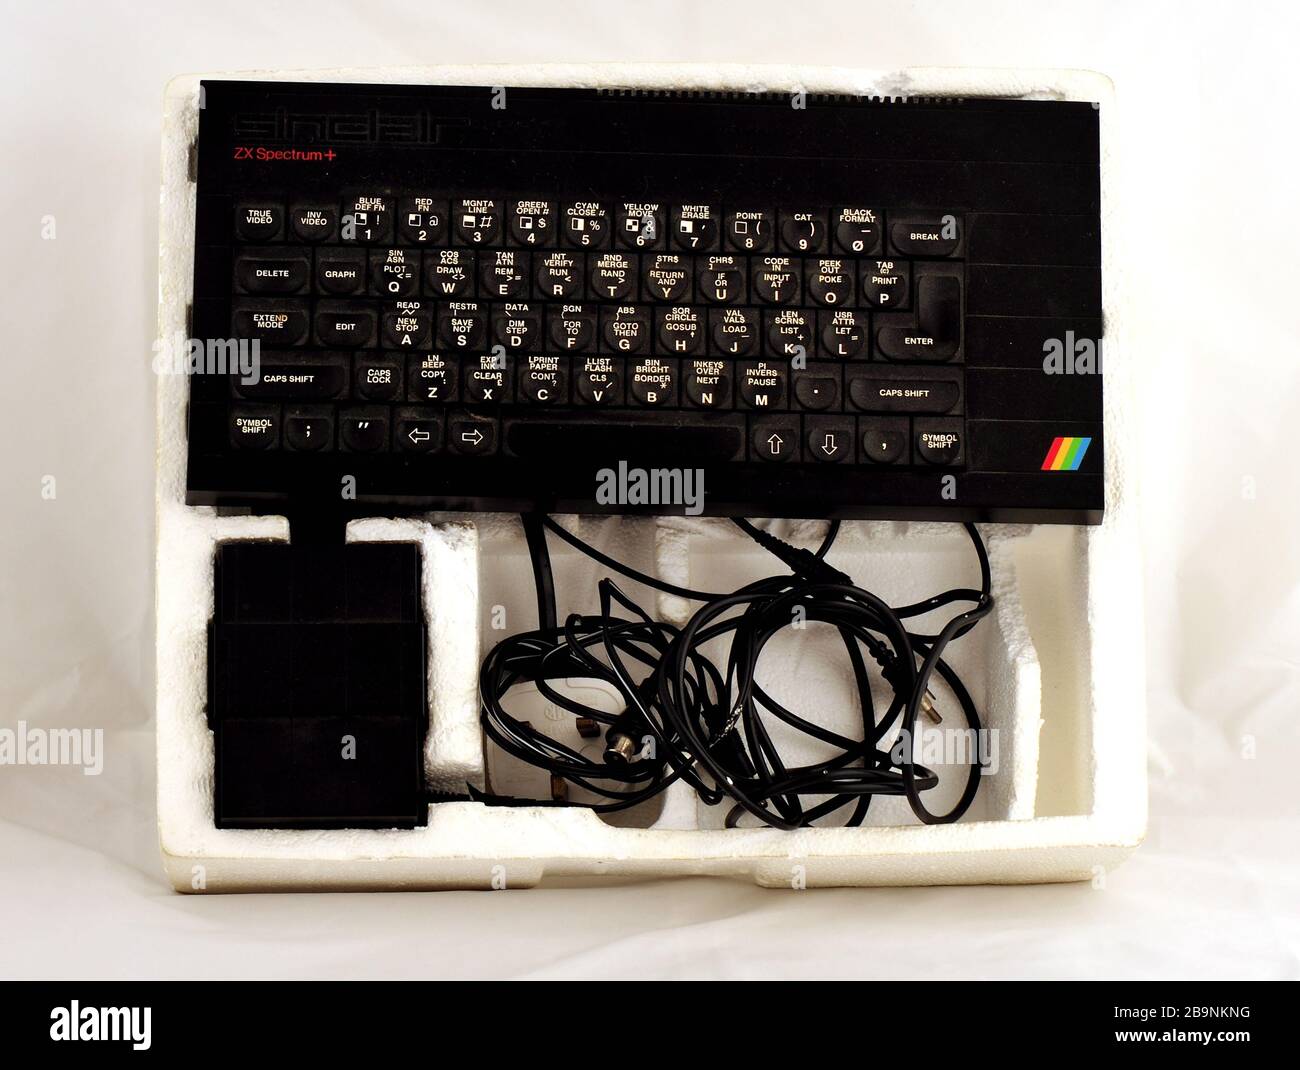 Original Sinclair Spectrum+ home computer and box, the bith of home computers in the UK. Stock Photo